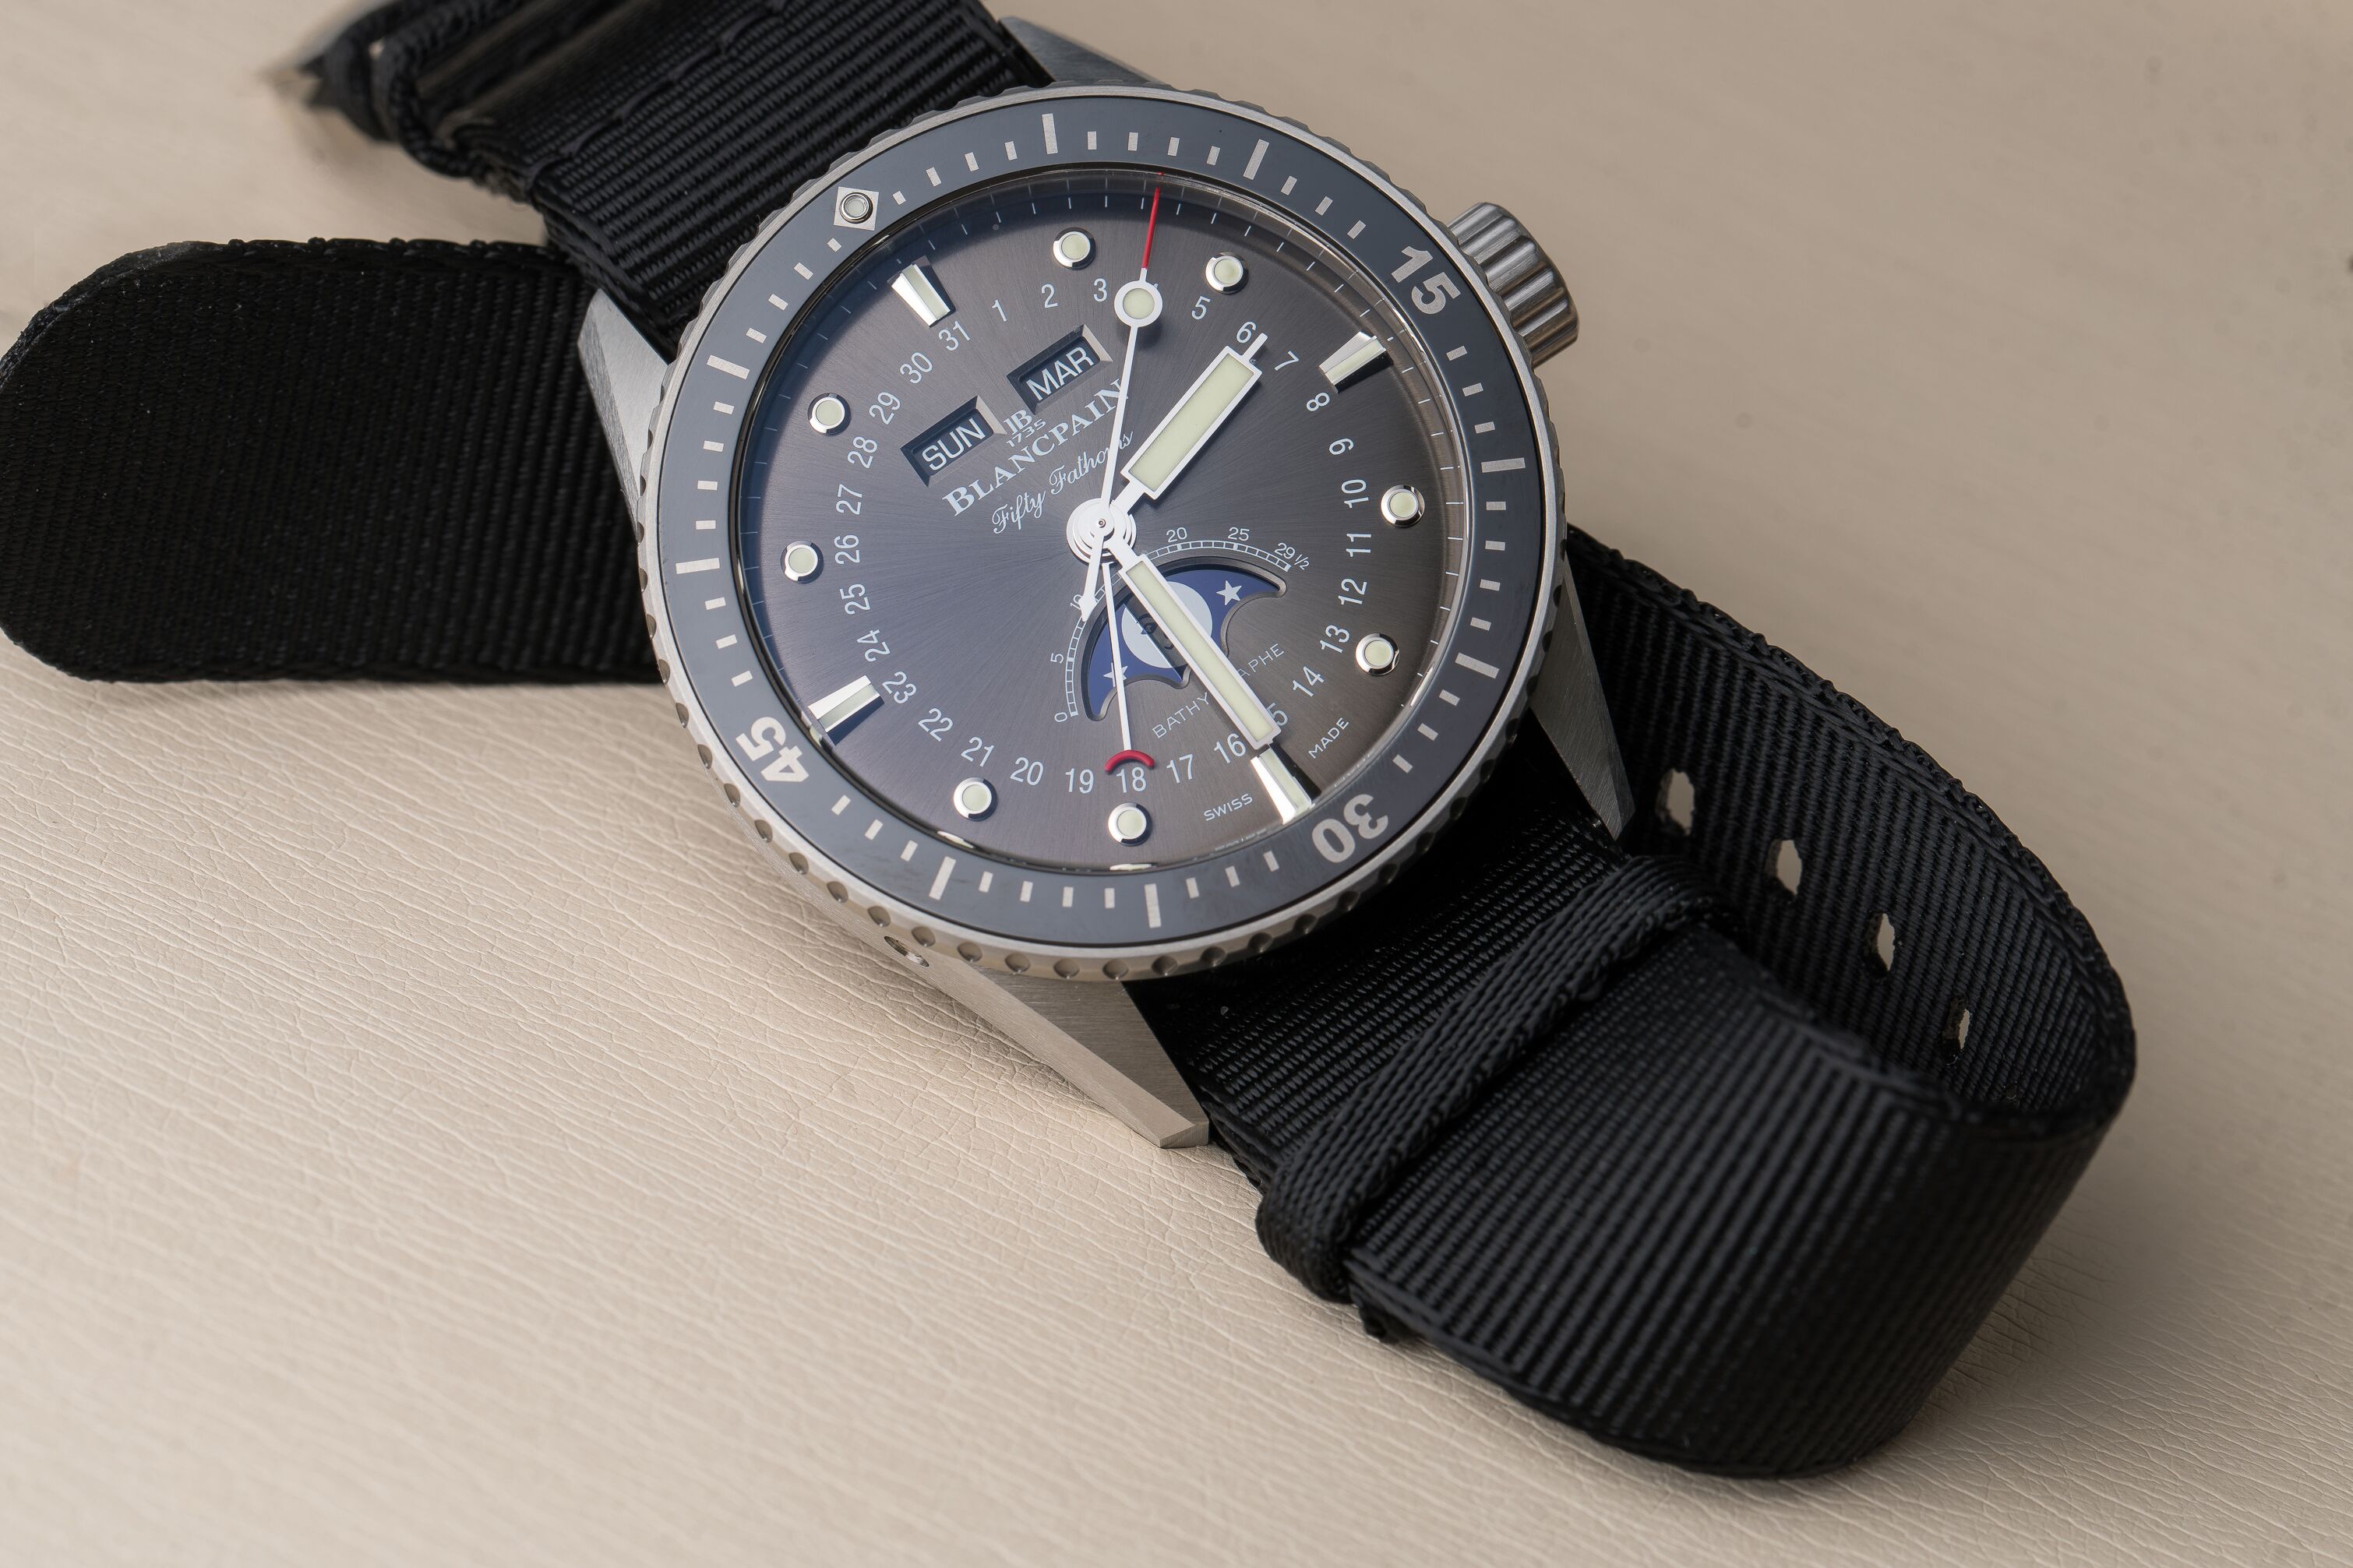 Diving Differently With The Blancpain Fifty Fathoms